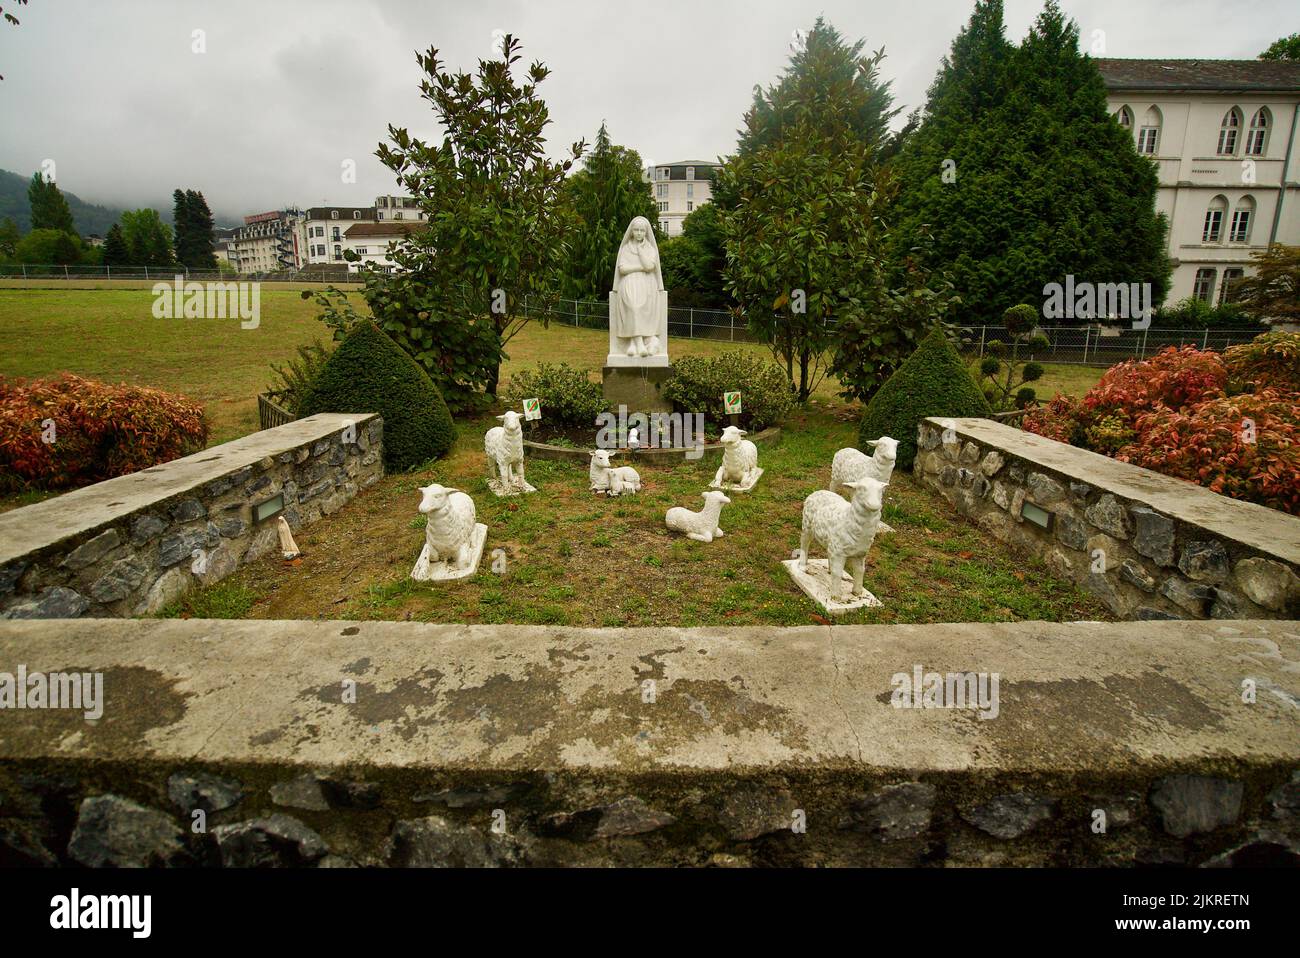 A Statue of Bernadette of Lourdes with sheep/lambs in Lourdes, France. Stock Photo